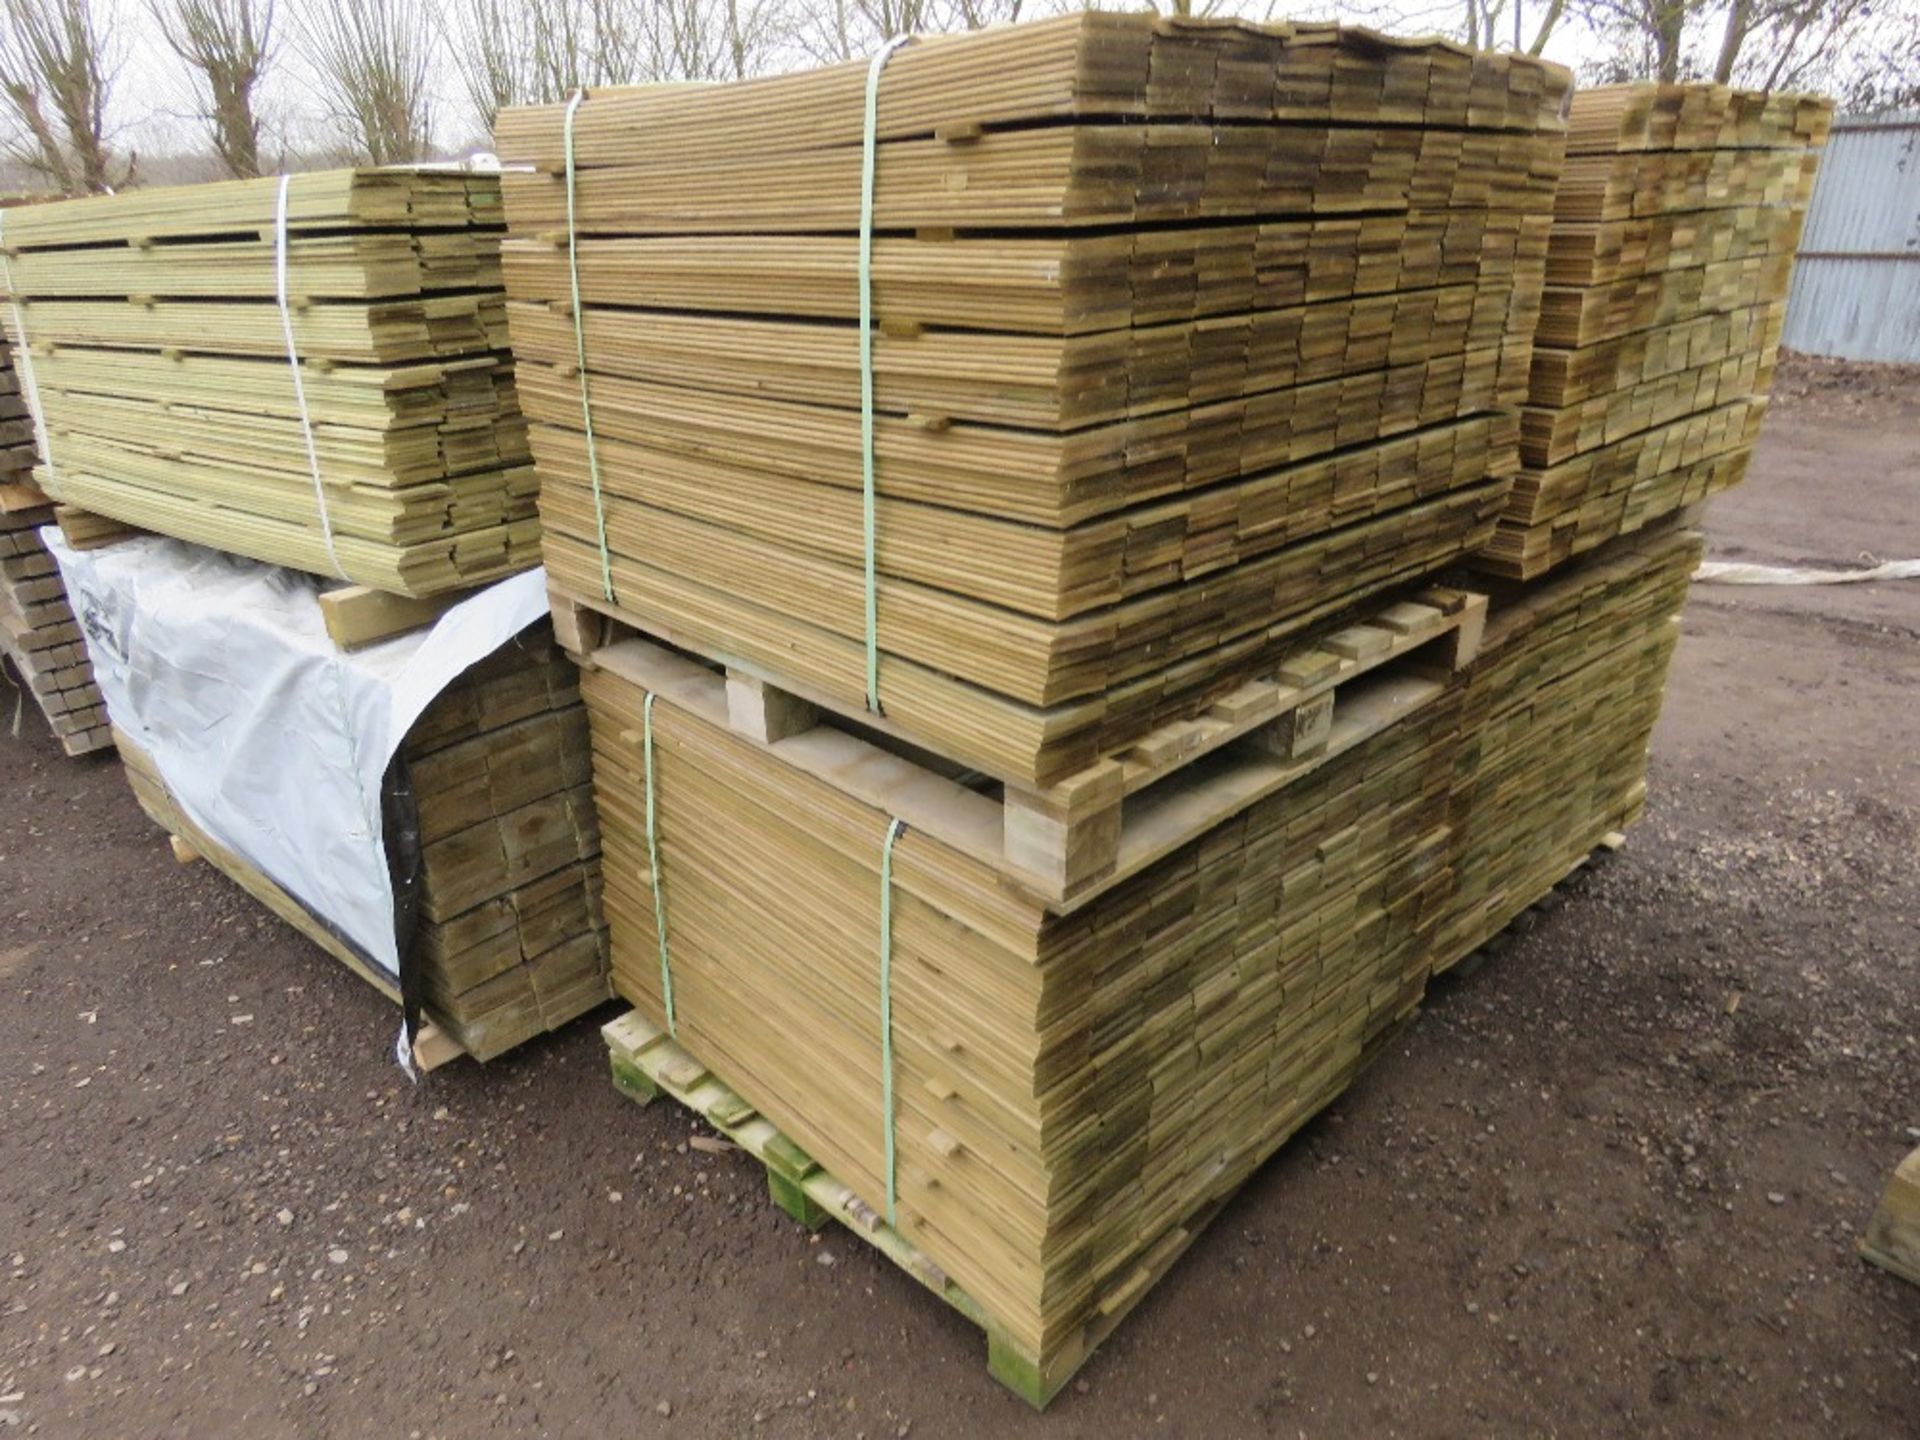 2 X PALLETS OF TREATED HIT AND MISS FENCE CLADDING BOARDS 1.04M LENGTH X 100MM WIDTH APPROX.